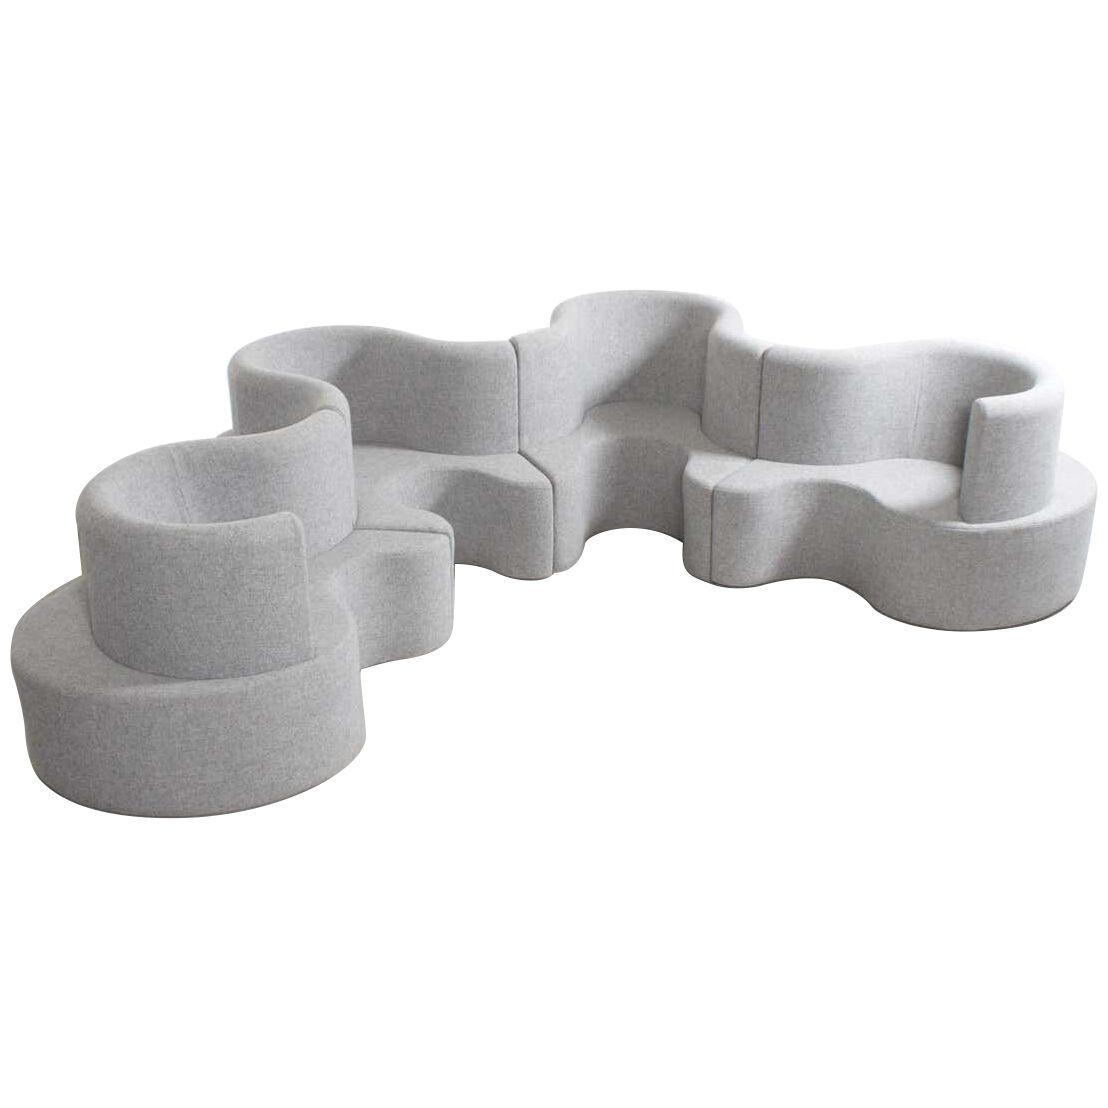 Impressive Clover Leaf Sectional Sofa by Verner Panton in Grey Fabric